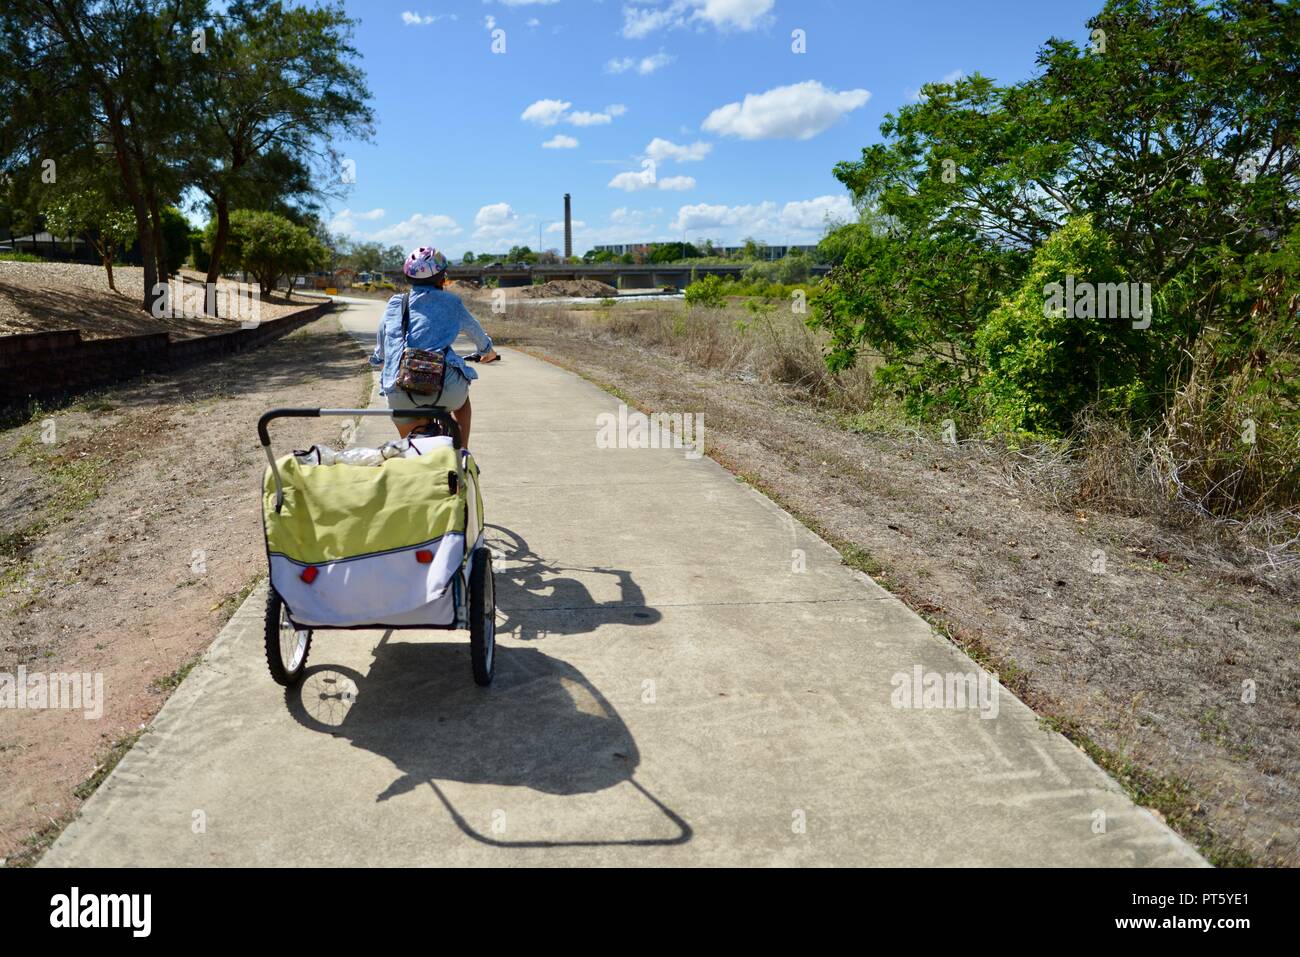 Woman riding a bicycle with a bicycle trailer for children, Townsville, QLD, Australia Stock Photo